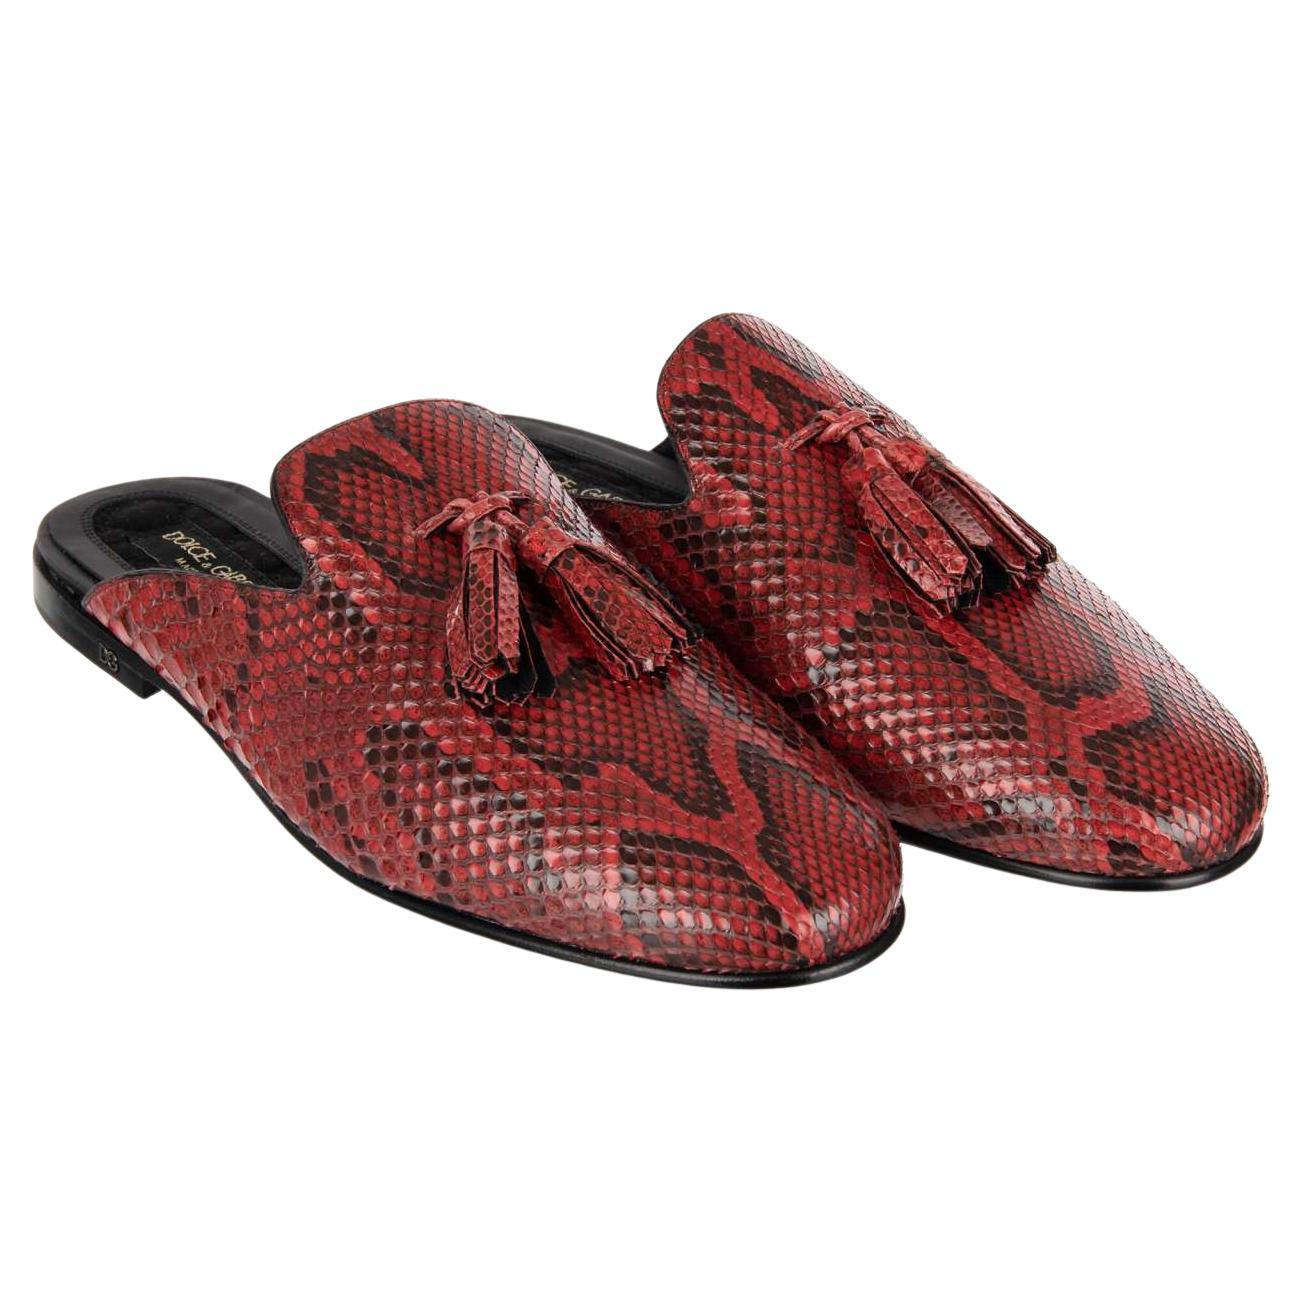 D&G Snake Leather Tassels Shoes Slipper YOUNG POPE Red 44 UK 10 US 11 For Sale